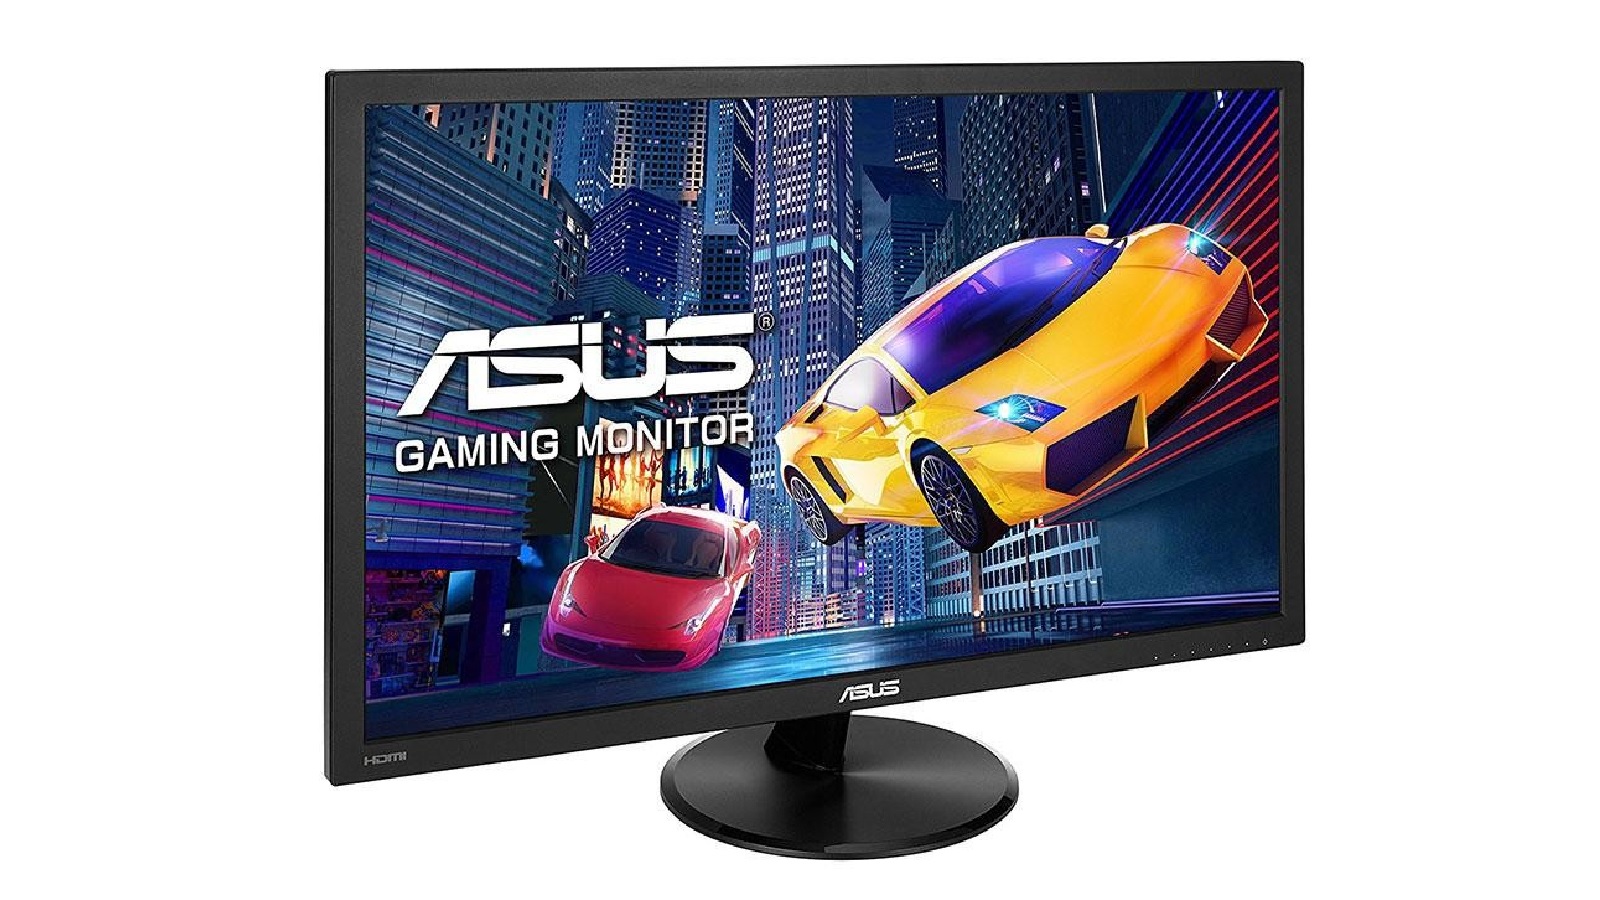 asus vp228he is one of the best budget monitors